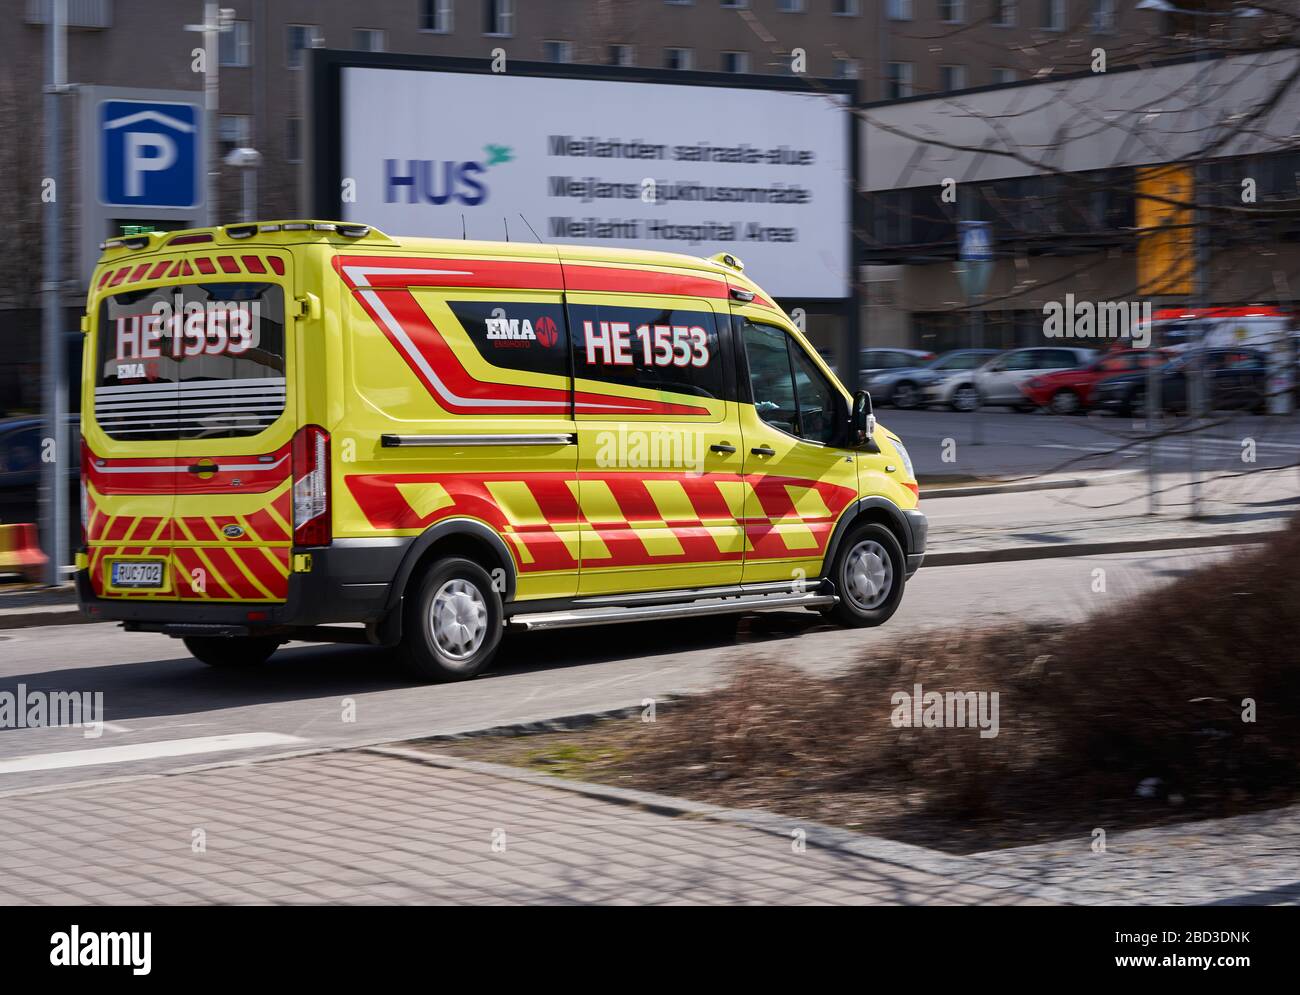 Helsinki, Finland - April 4, 2020: An ambulance arriving in high speed to the Meilahti Hospital area during the covid-19 pandemic outbreak. Stock Photo